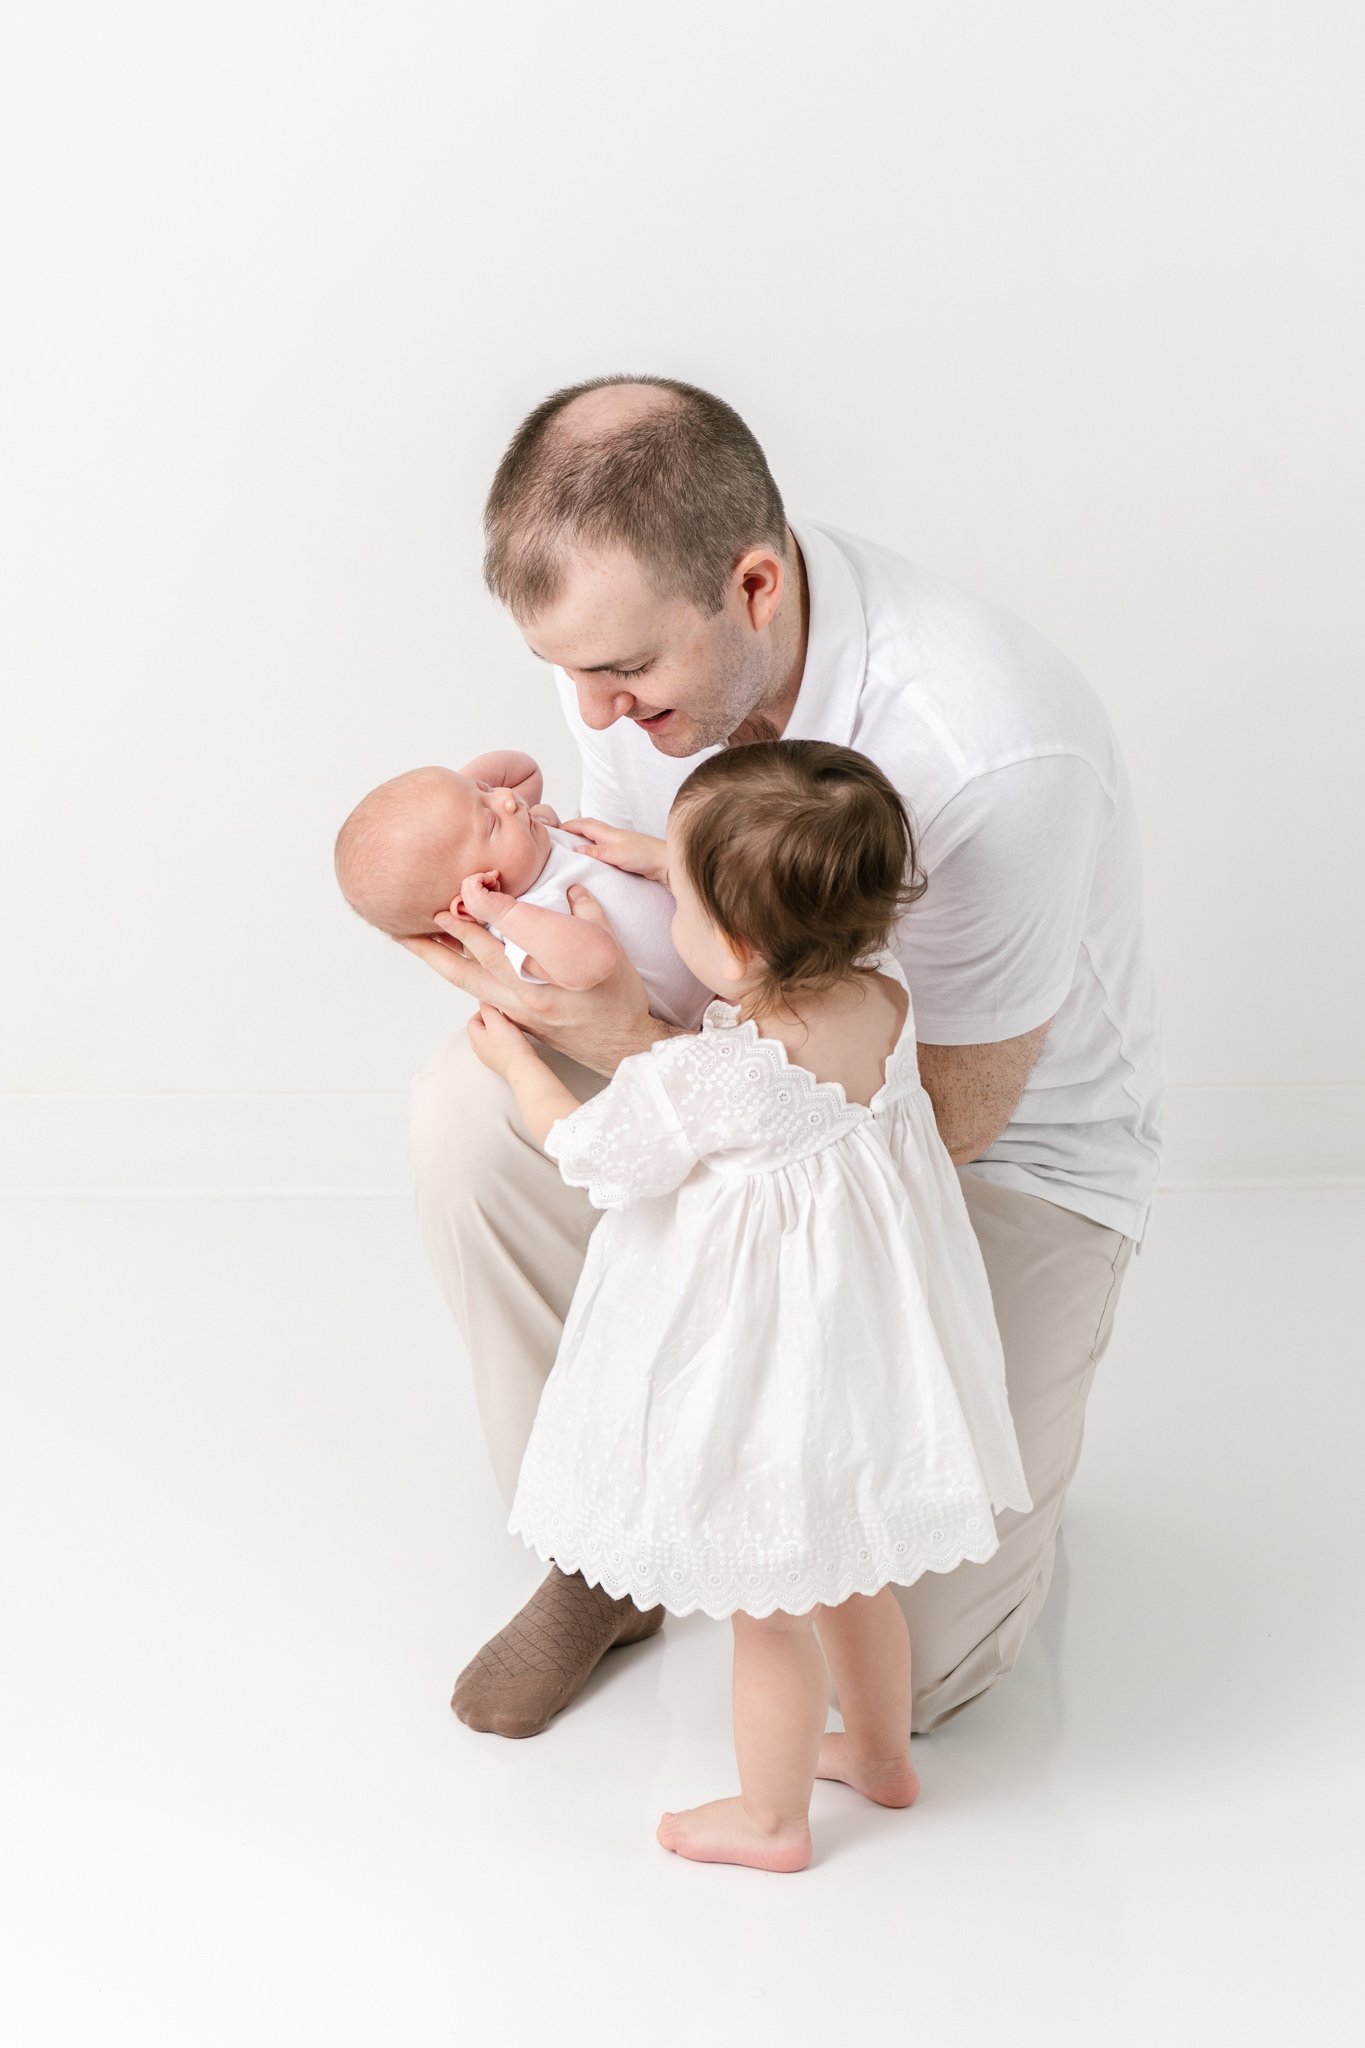  A father holds a newborn daughter showing his toddler little girl her sister by Nicole Hawkins Photography. father and daughter portraits white dress toddler #NicoleHawkinsPhotography #NicoleHawkinsNewborns #StudioNewborn #StudioFamily #EastCoastNew